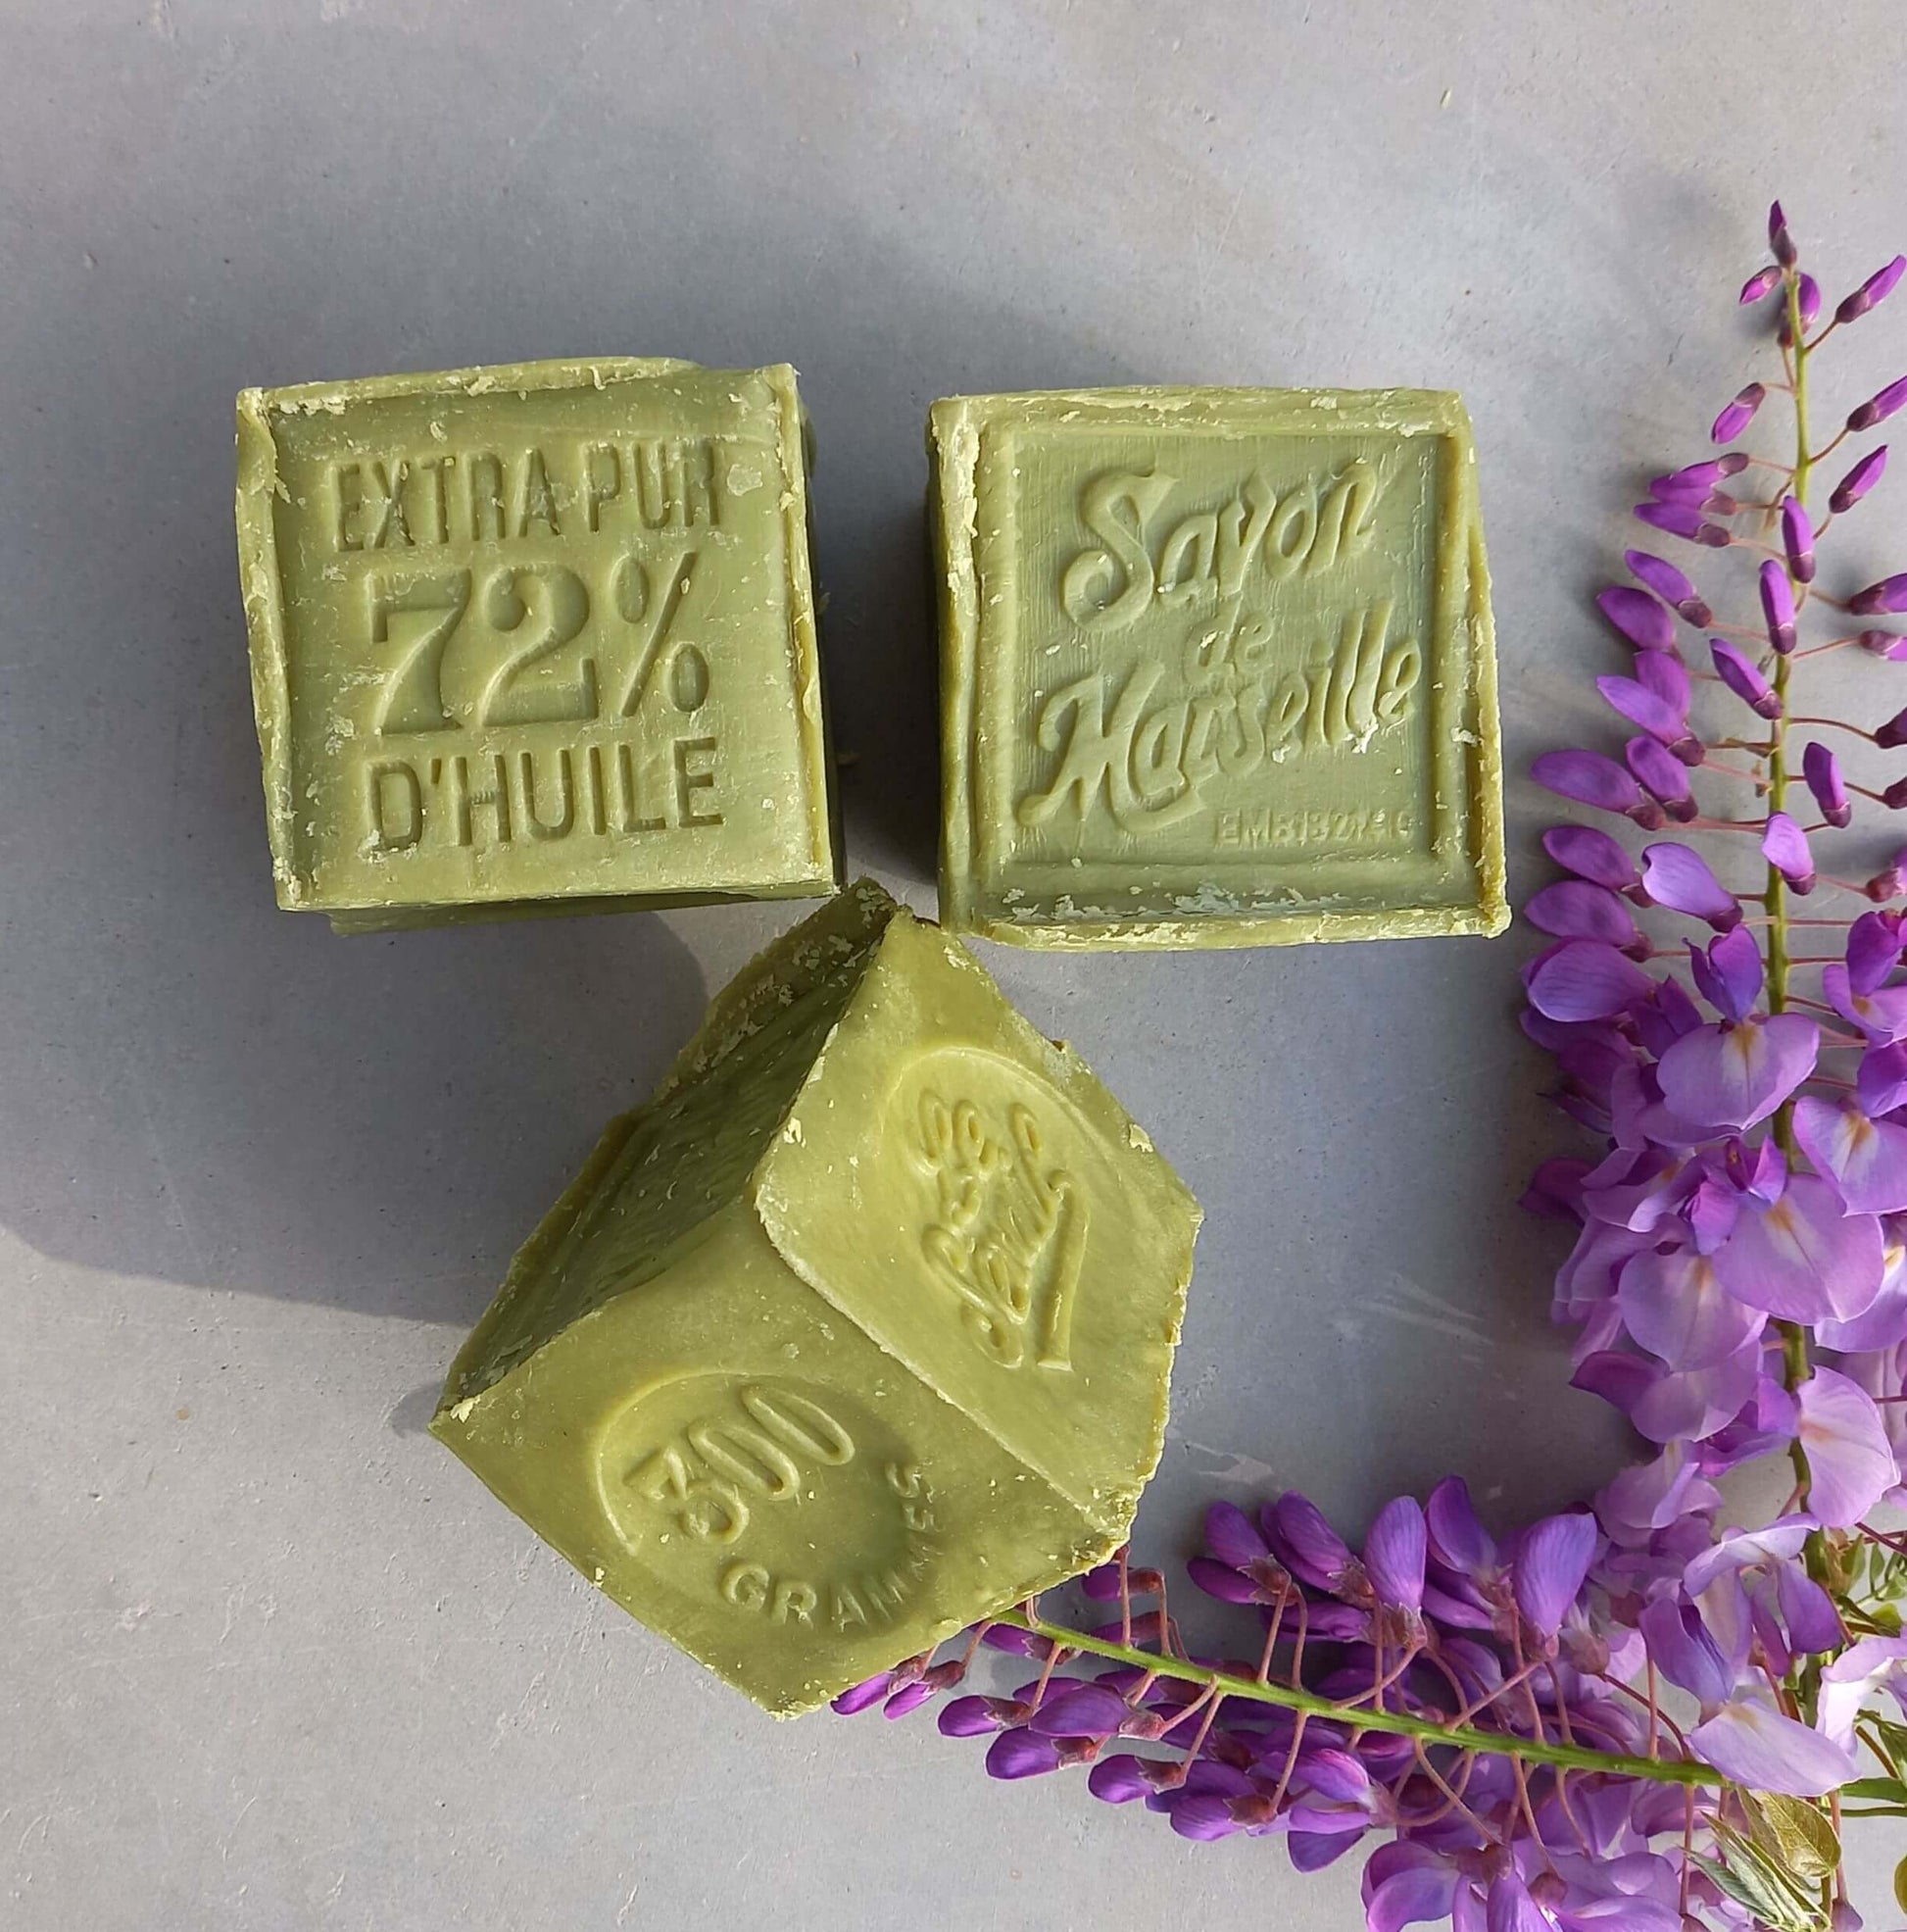 Marseille Soap Extra pure 72 % Olive Oil - Unik by Nature